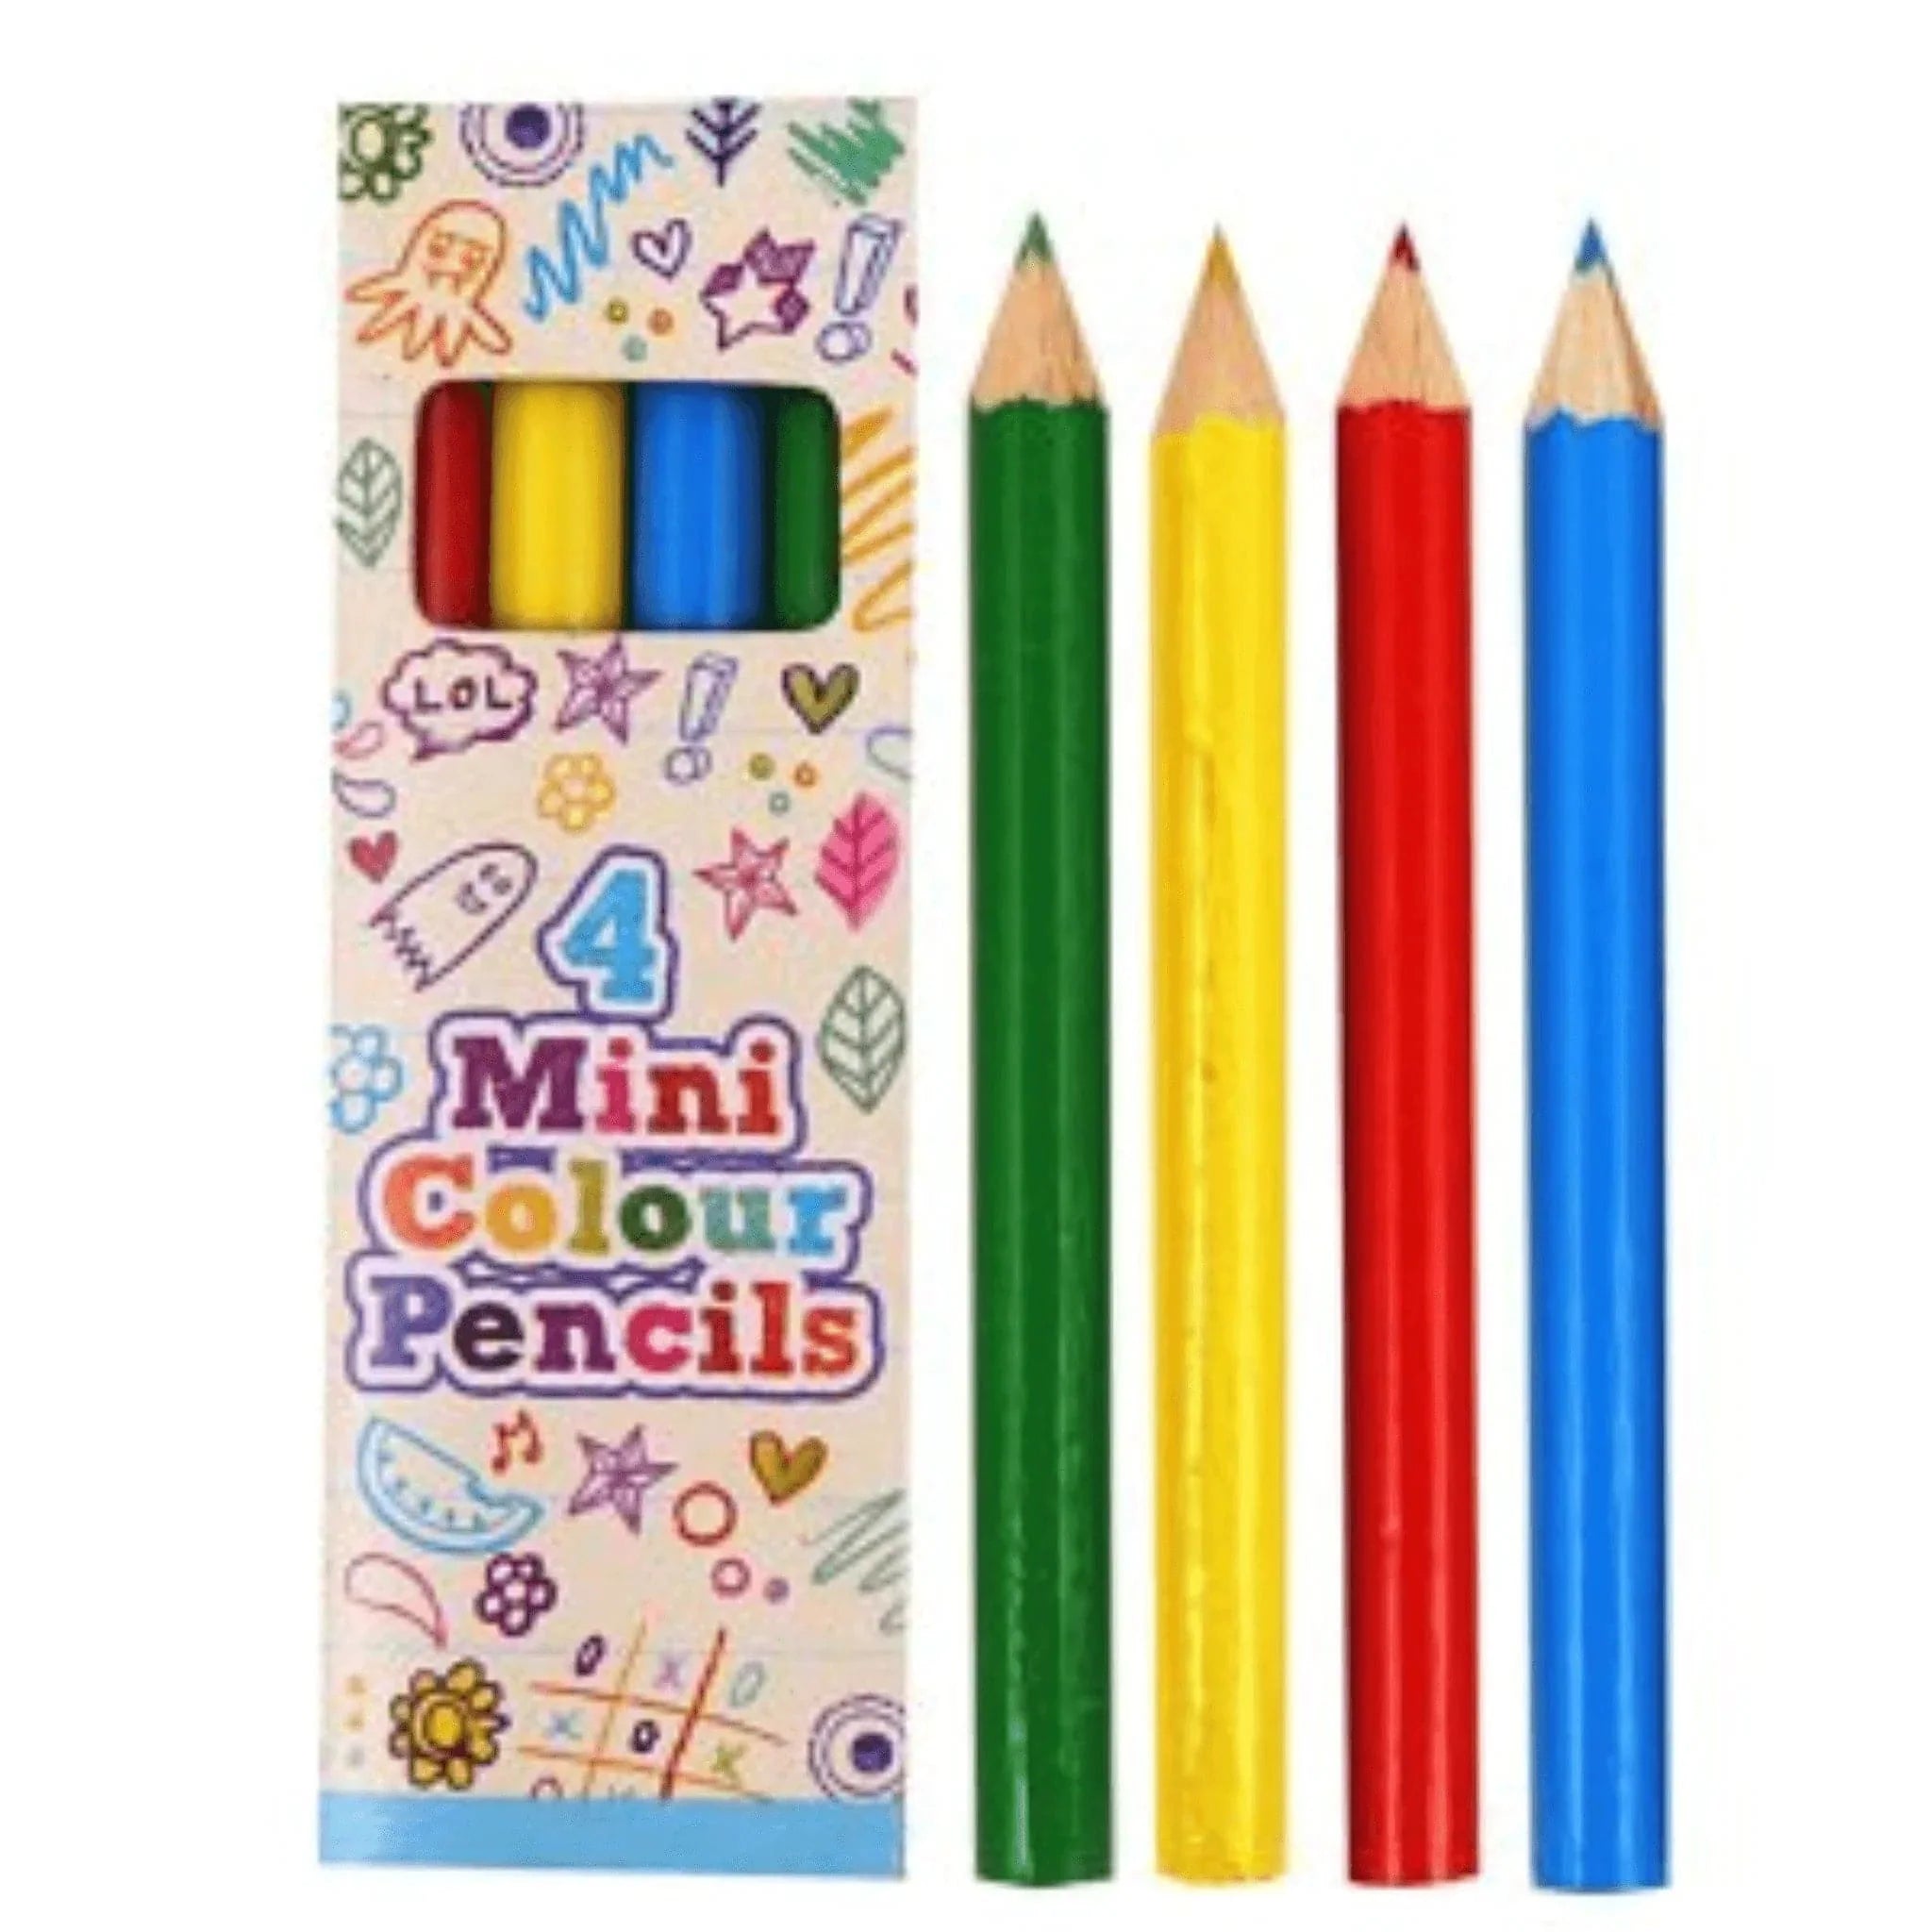 Mini Colouring Pencils 4 Pack - Kids Party Craft